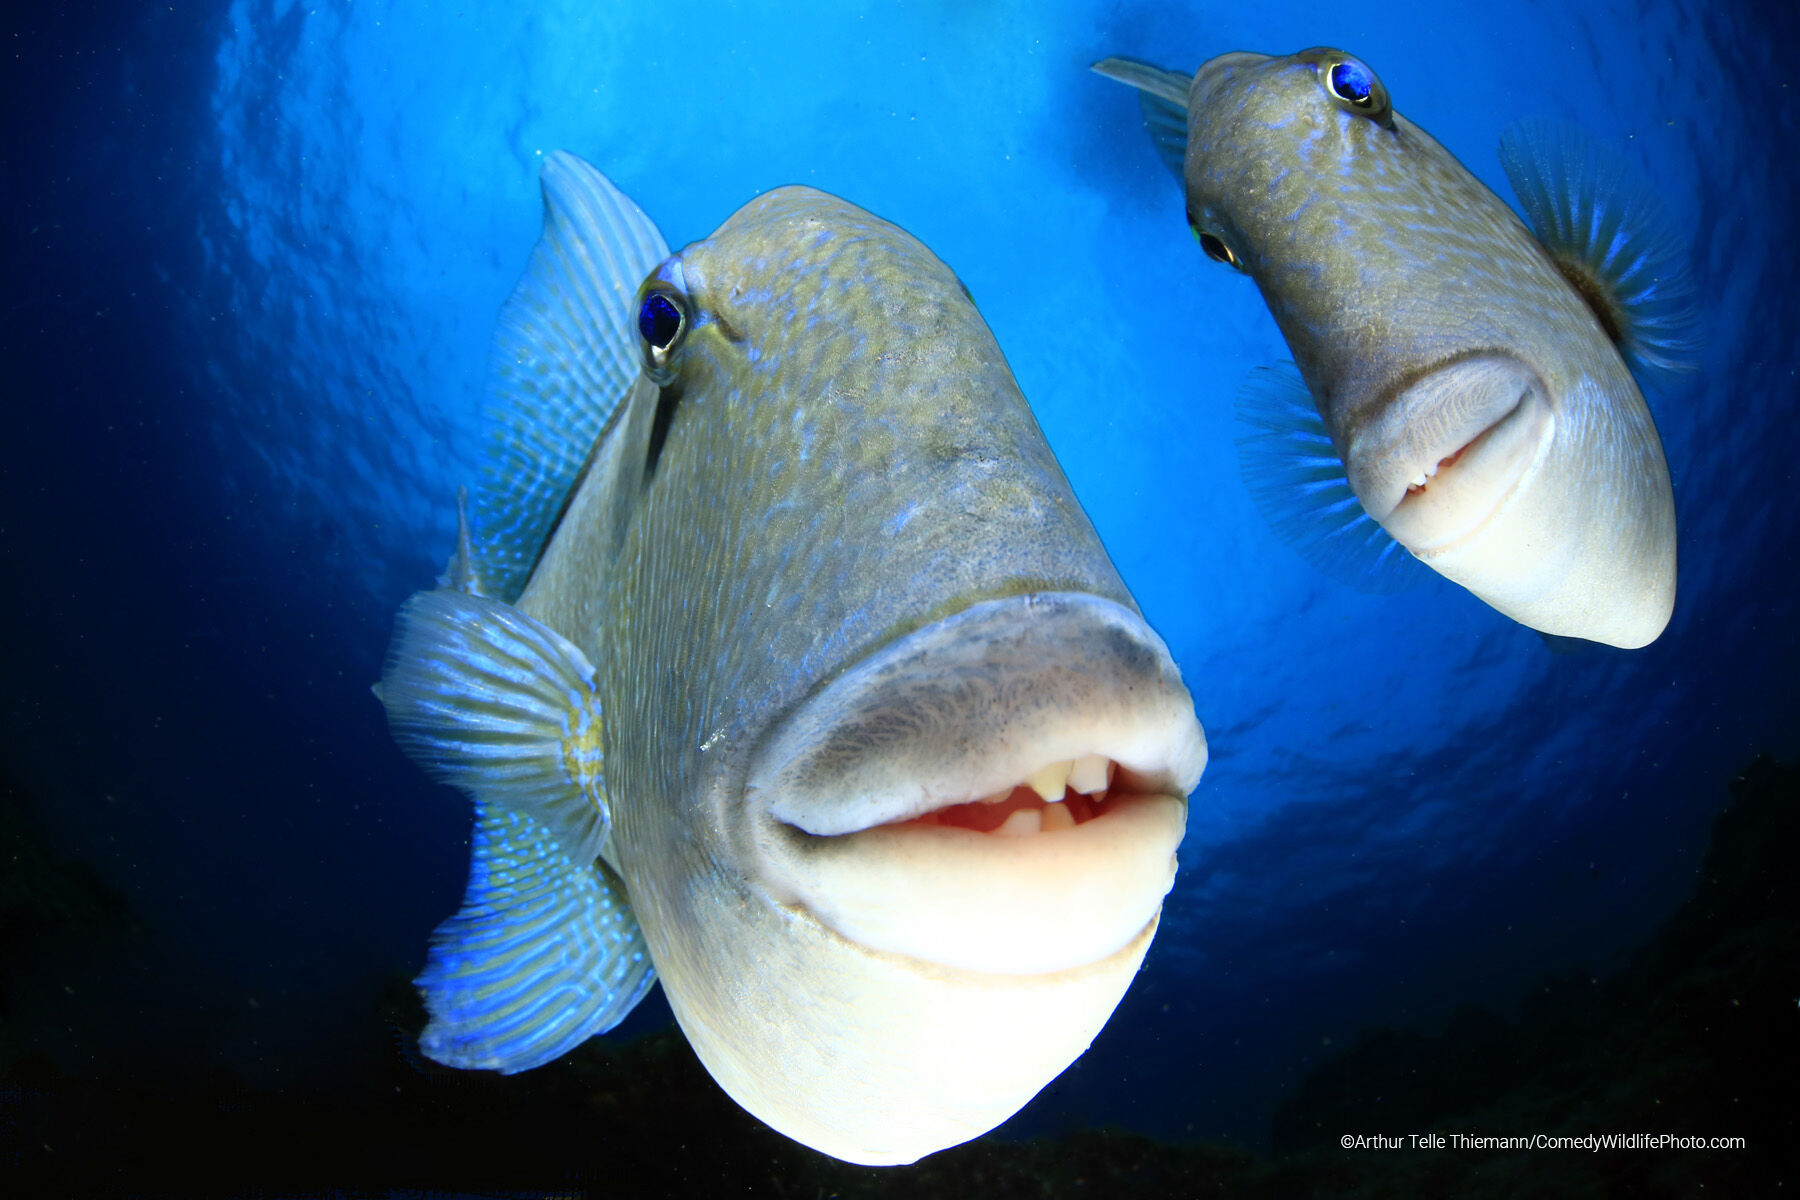 The Comedy Wildlife Photography Awards 2022
Arthur Telle Thiemann
Telde
Spain

Title: "Say cheeeese"
Description: A couple of triggerfish looking into the camera, captured at the Azores.Even they may look funny, these fish can be quite aggressive. In this case they didn't attempt to bite me, but the domeport of my camera housing ended up with some scratches... life is hard... at least it wasn't me who was hurt
Animal: Grey triggerfish, Ballistes capriscus
Location of shot: Faial, Azores